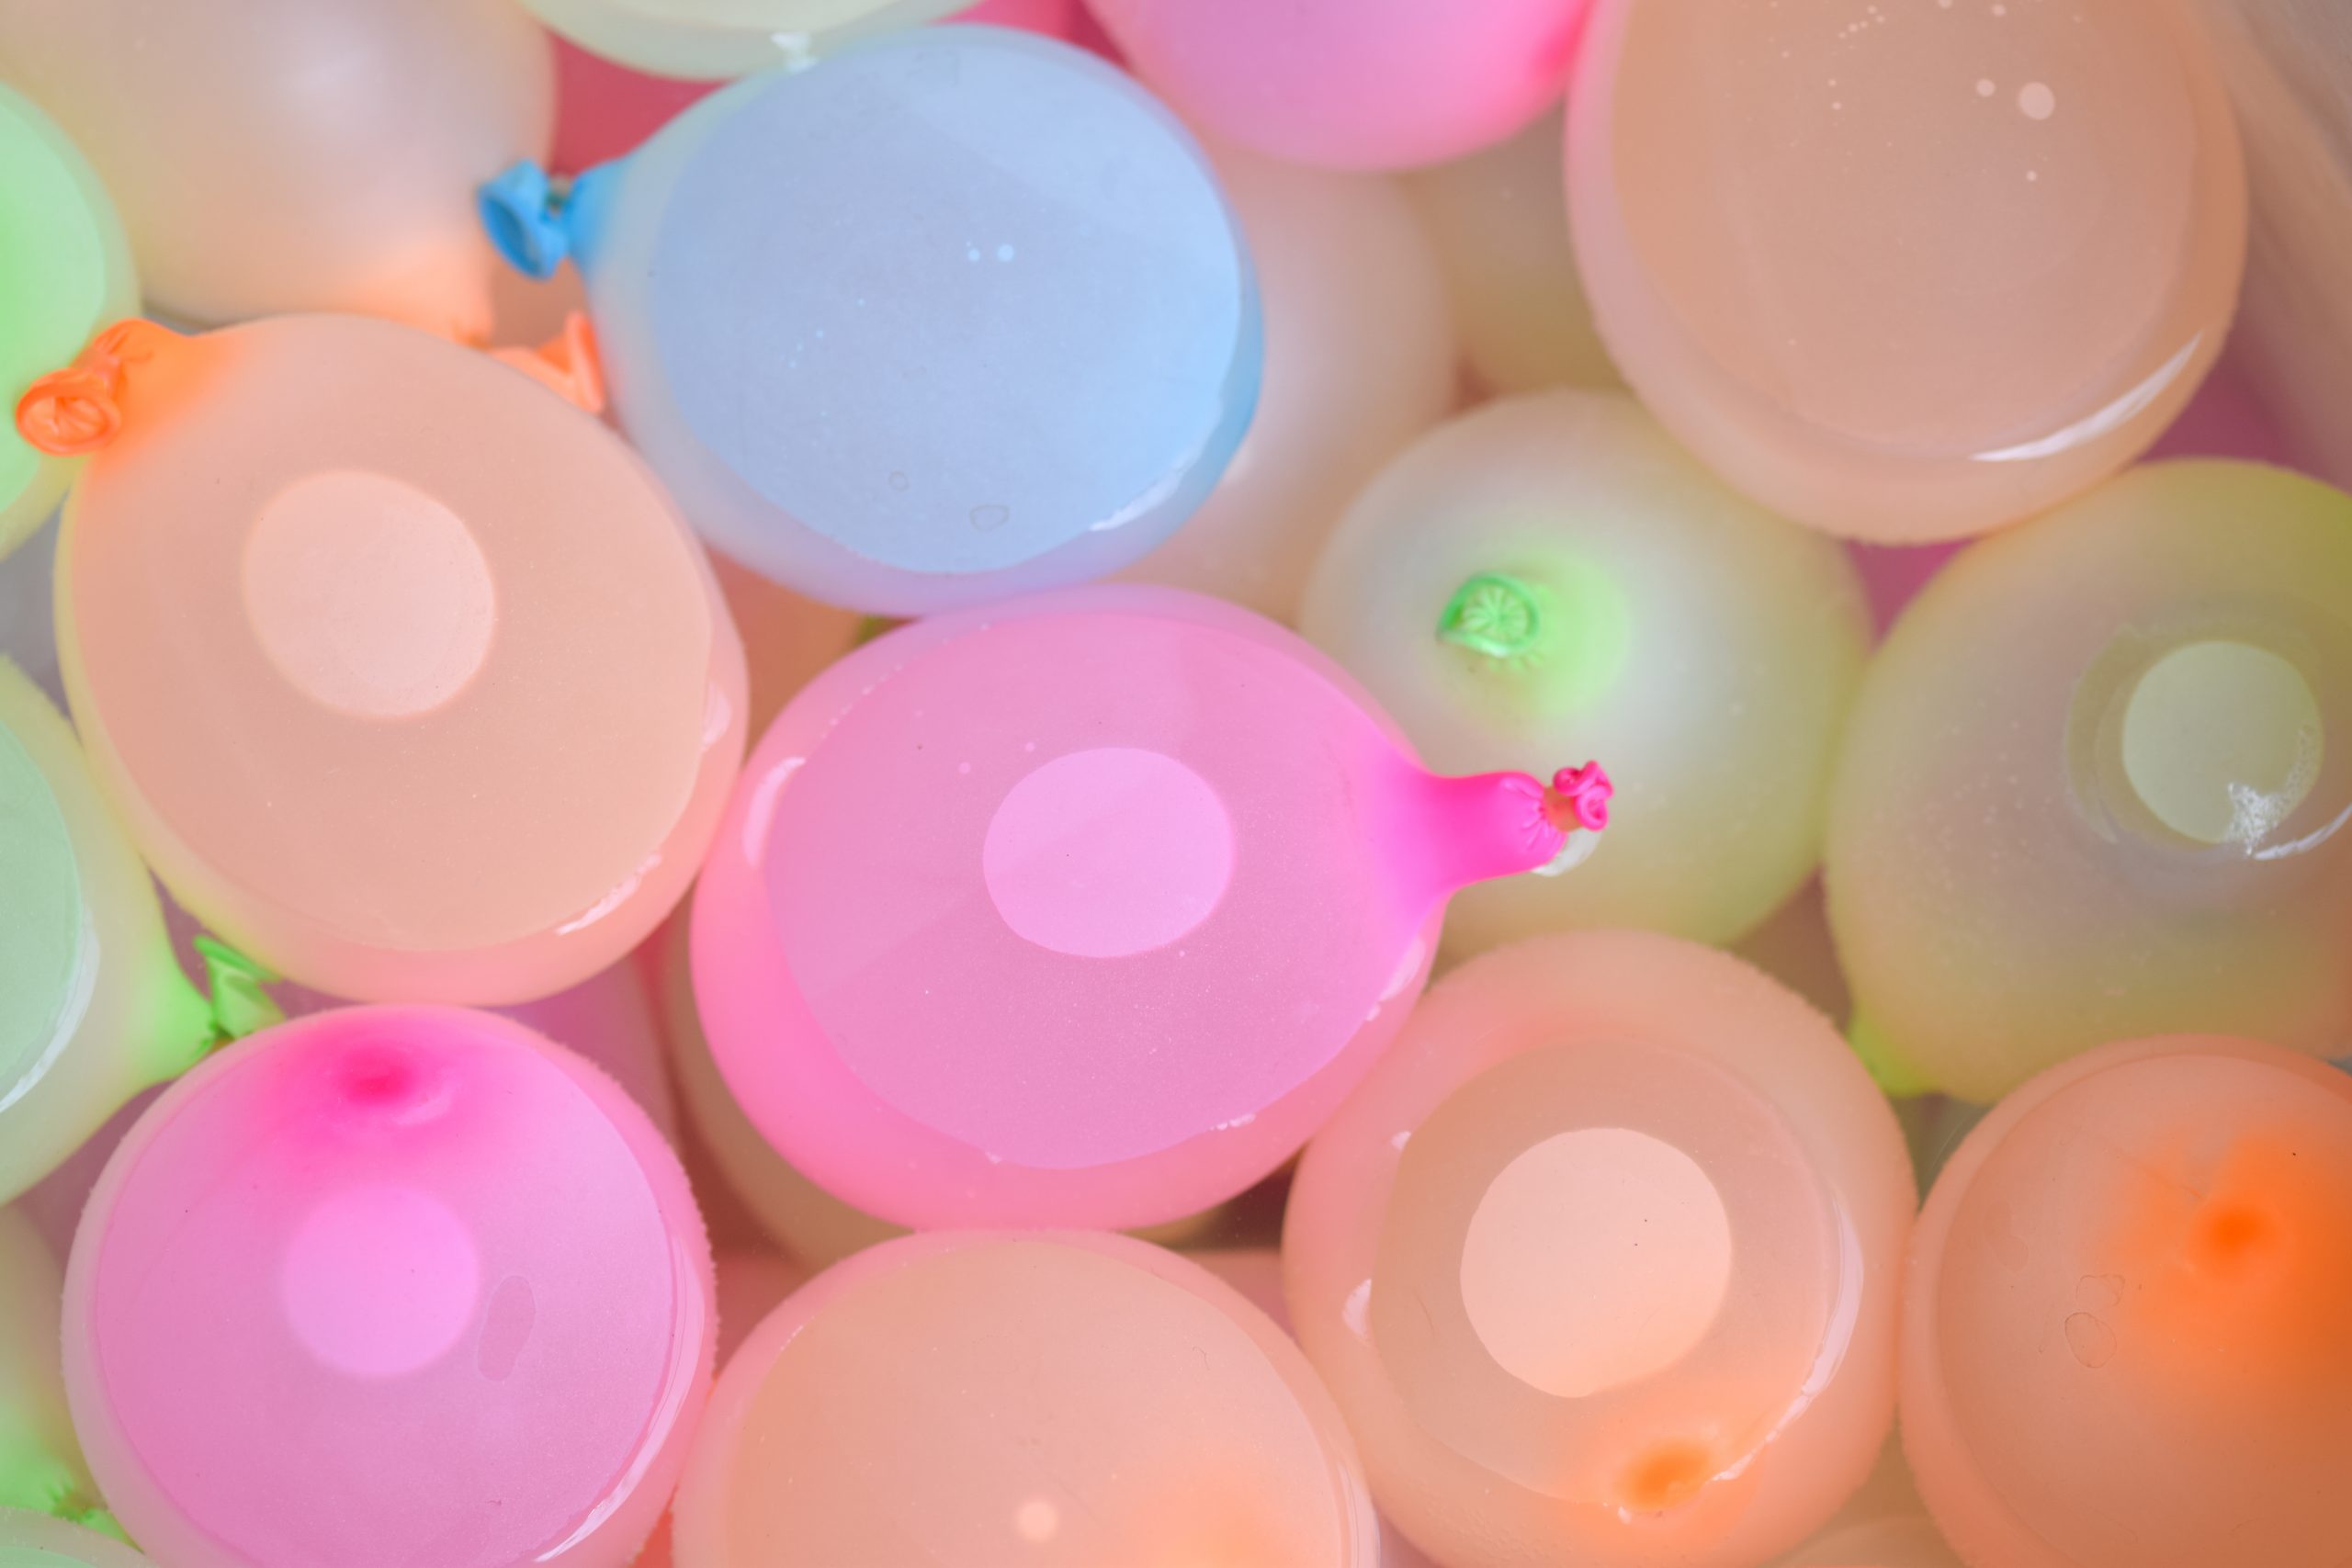 Water balloons in a water tub.